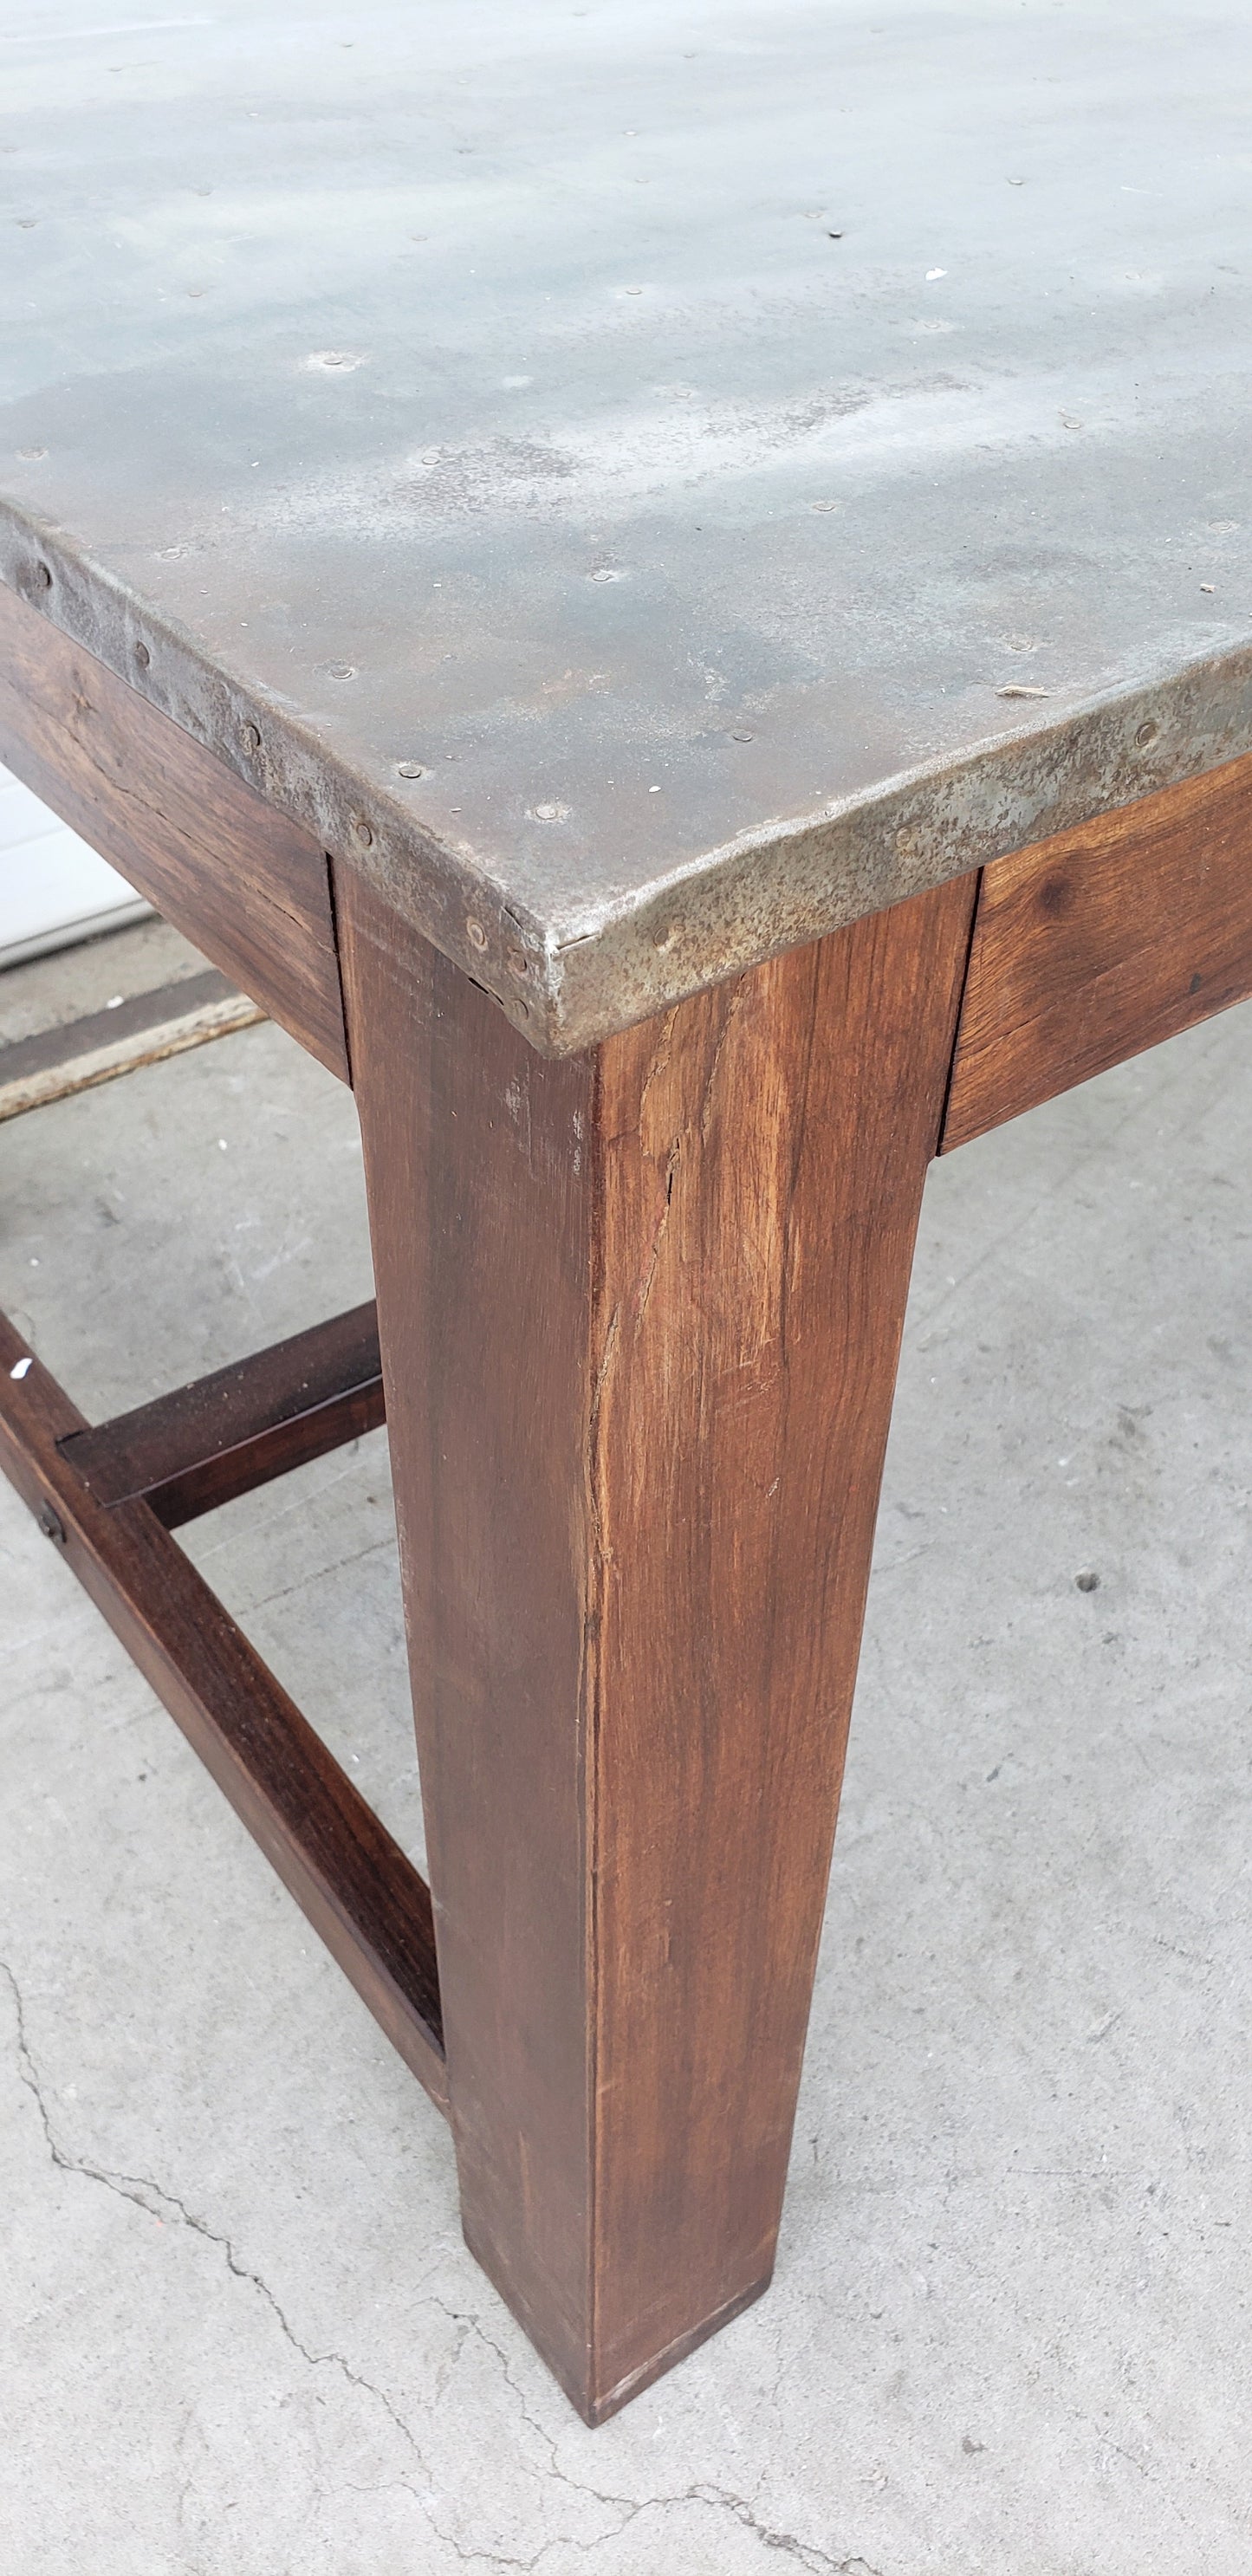 Wood Table with Iron Top